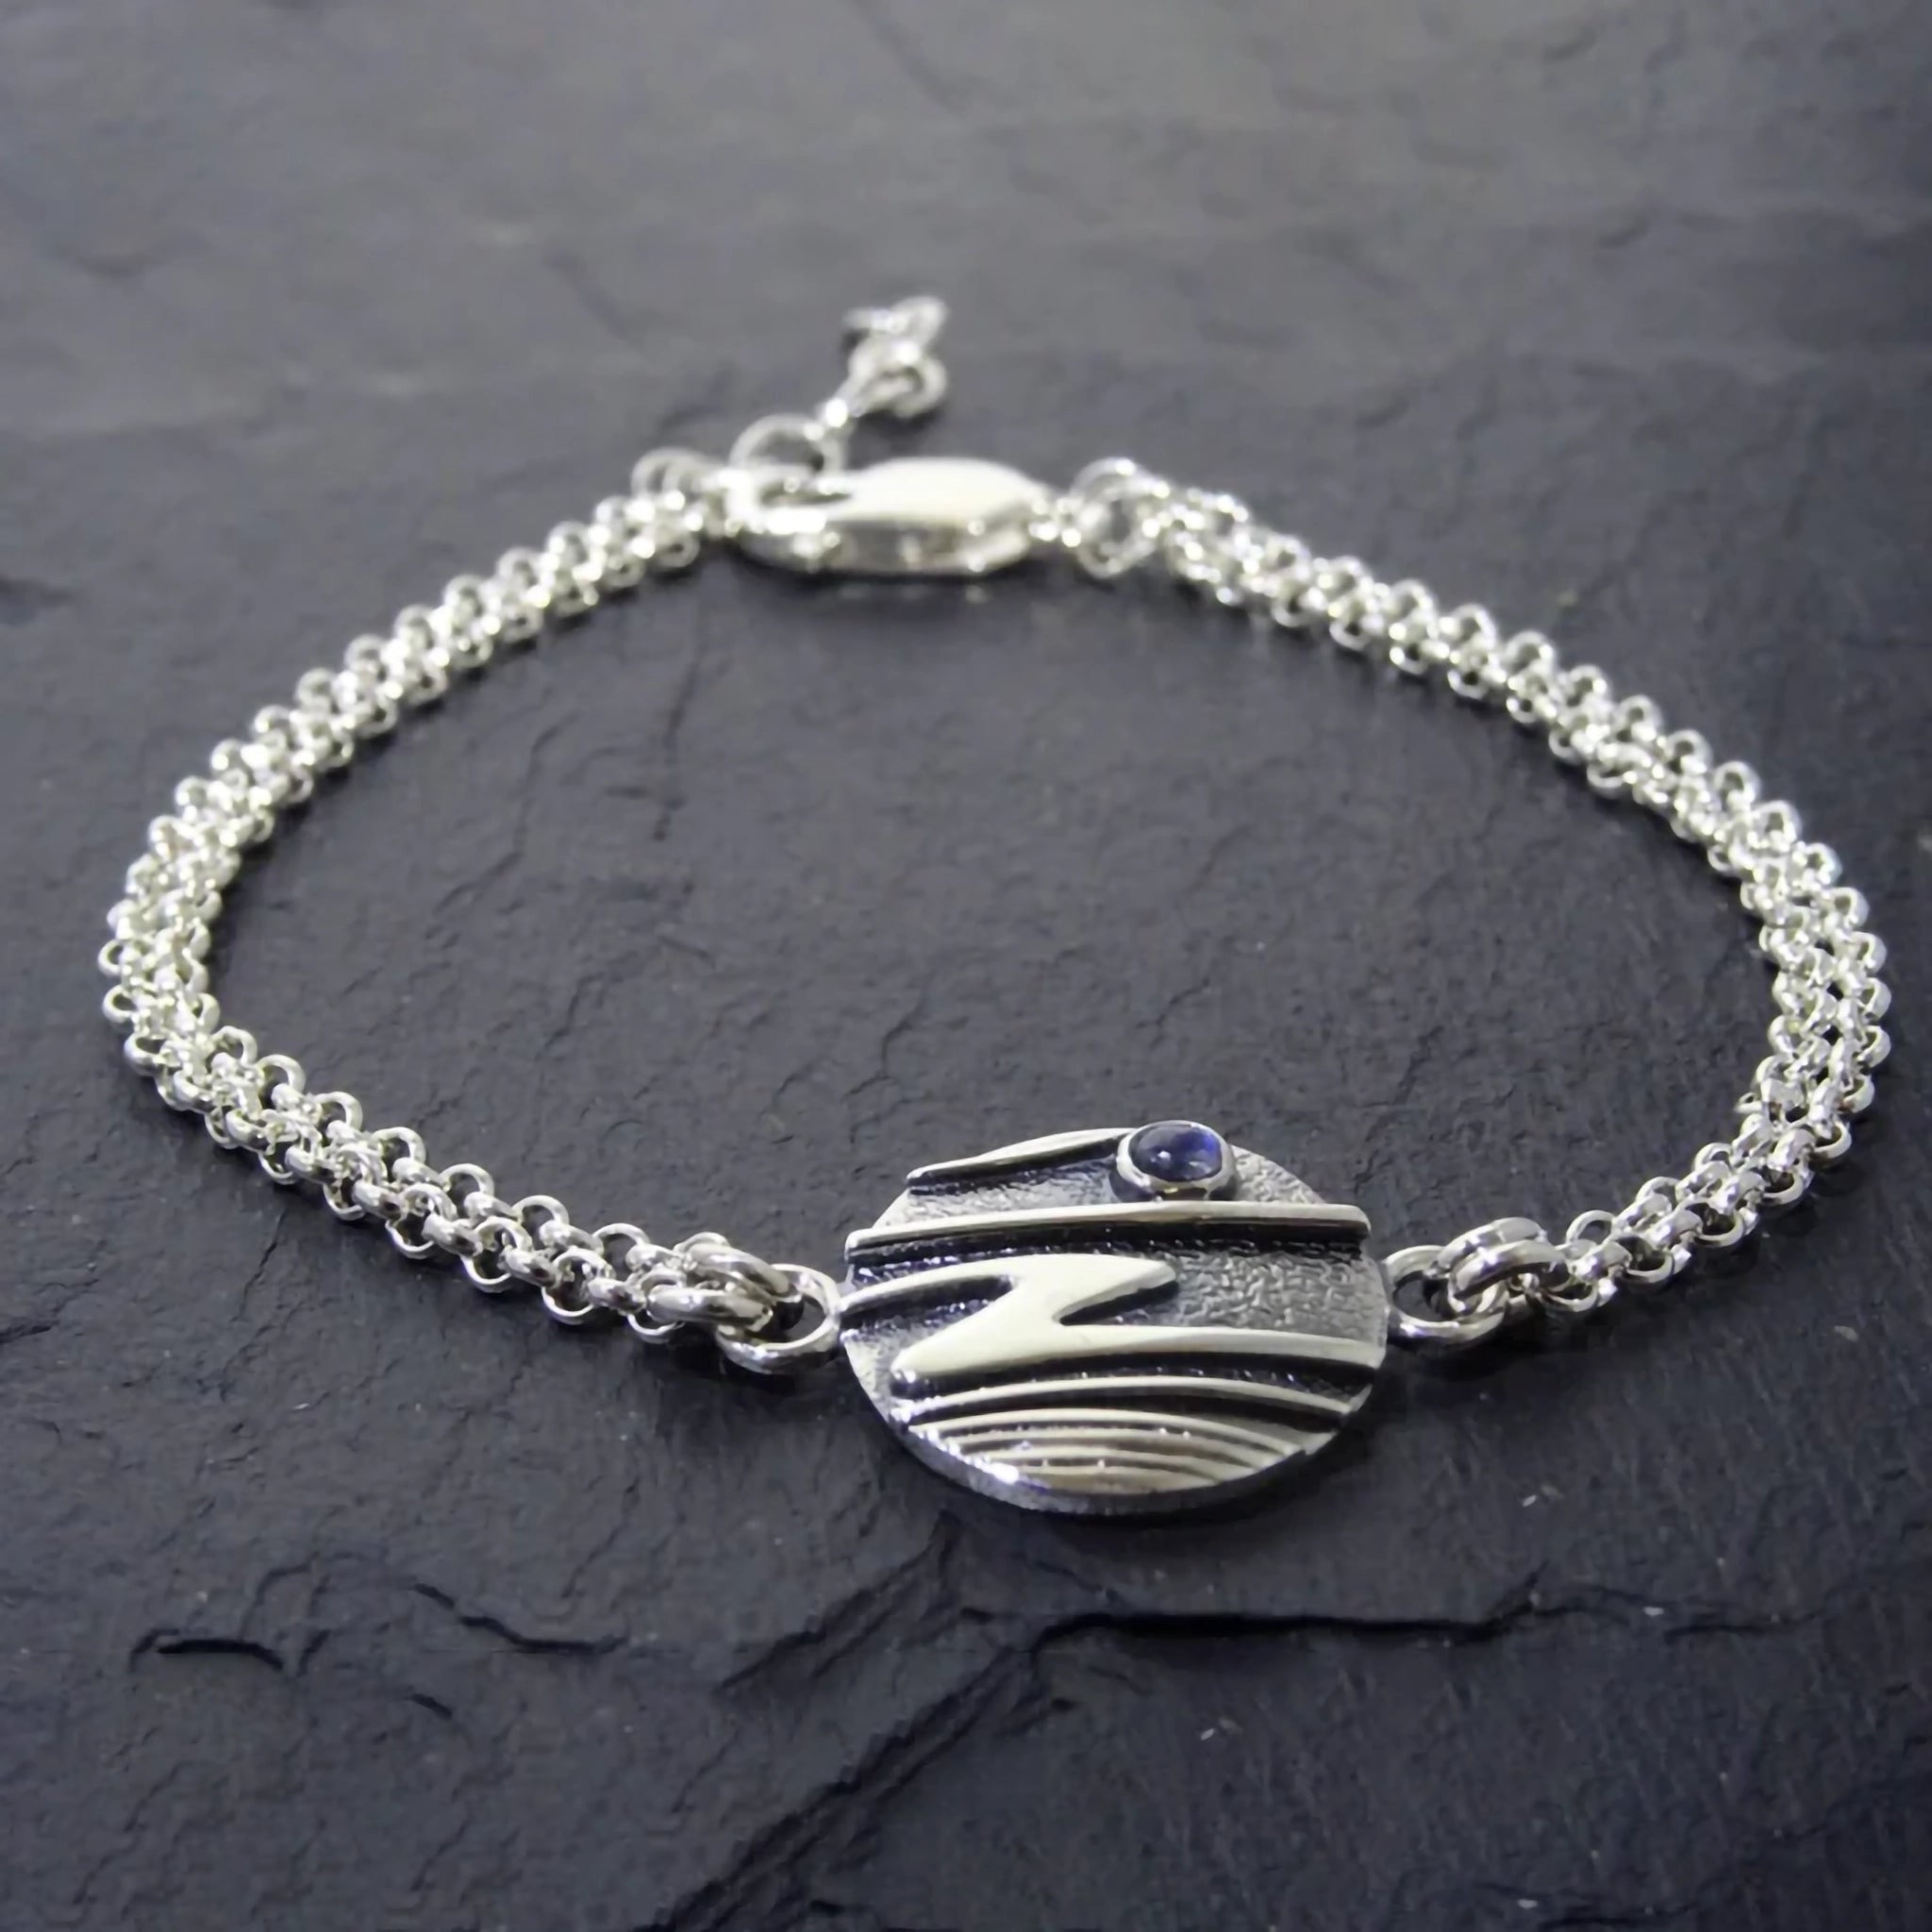 A silver double chain bracelet featuring a round pendant with raised ripple texture design and a small moonstone